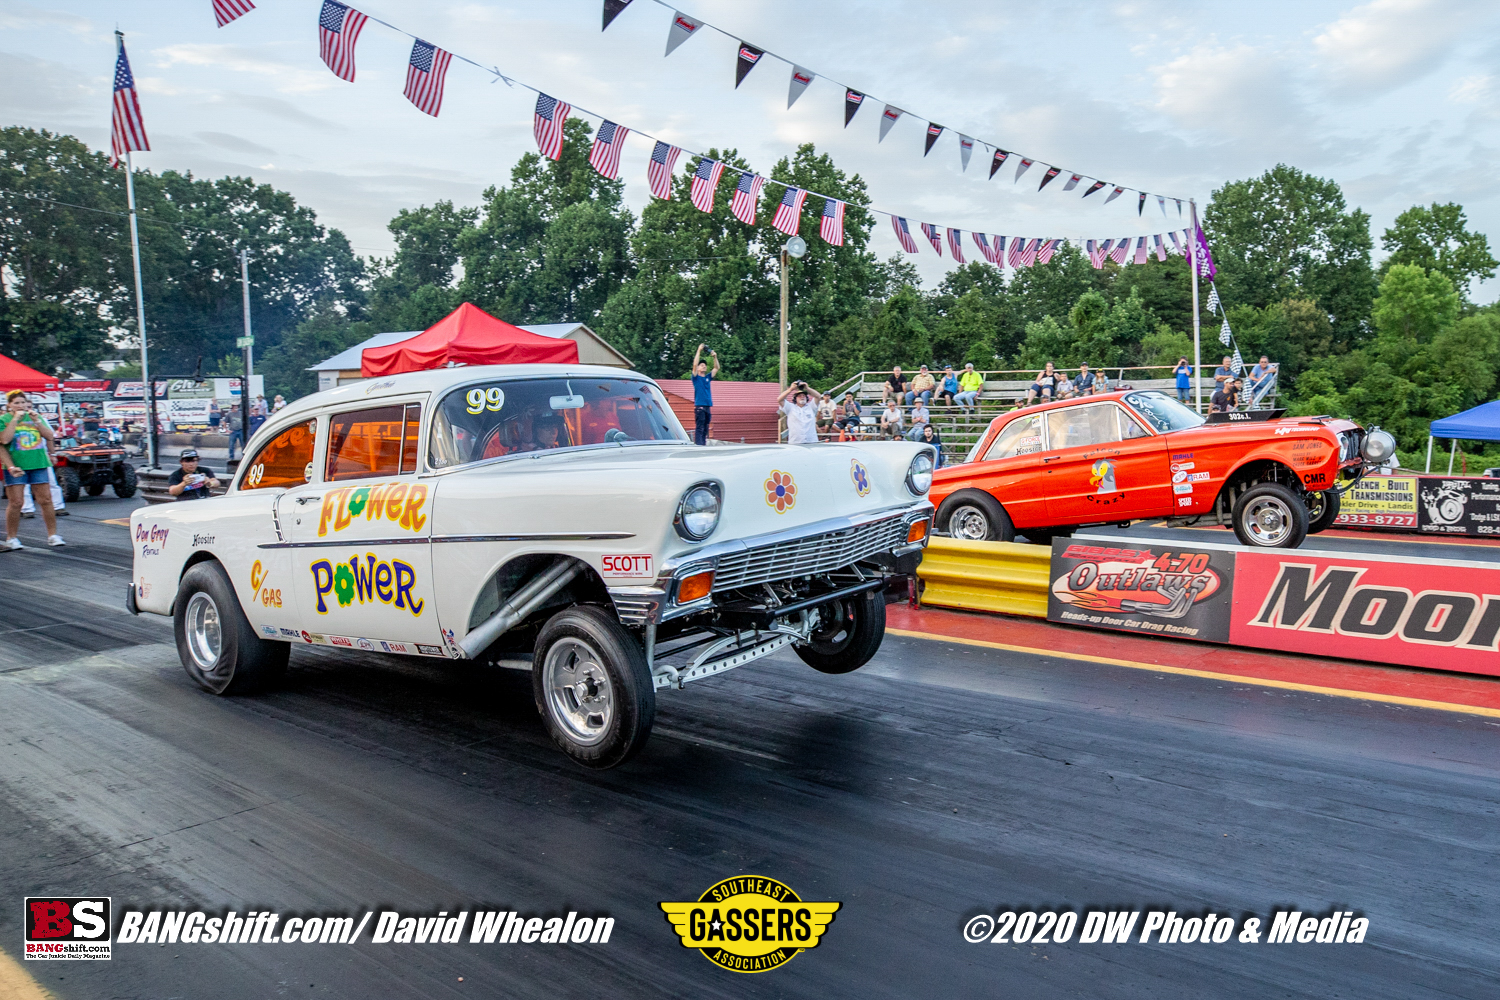 Southeast Gassers Last Blast: More Great Drag Racing Photos From Mooresville Dagway!